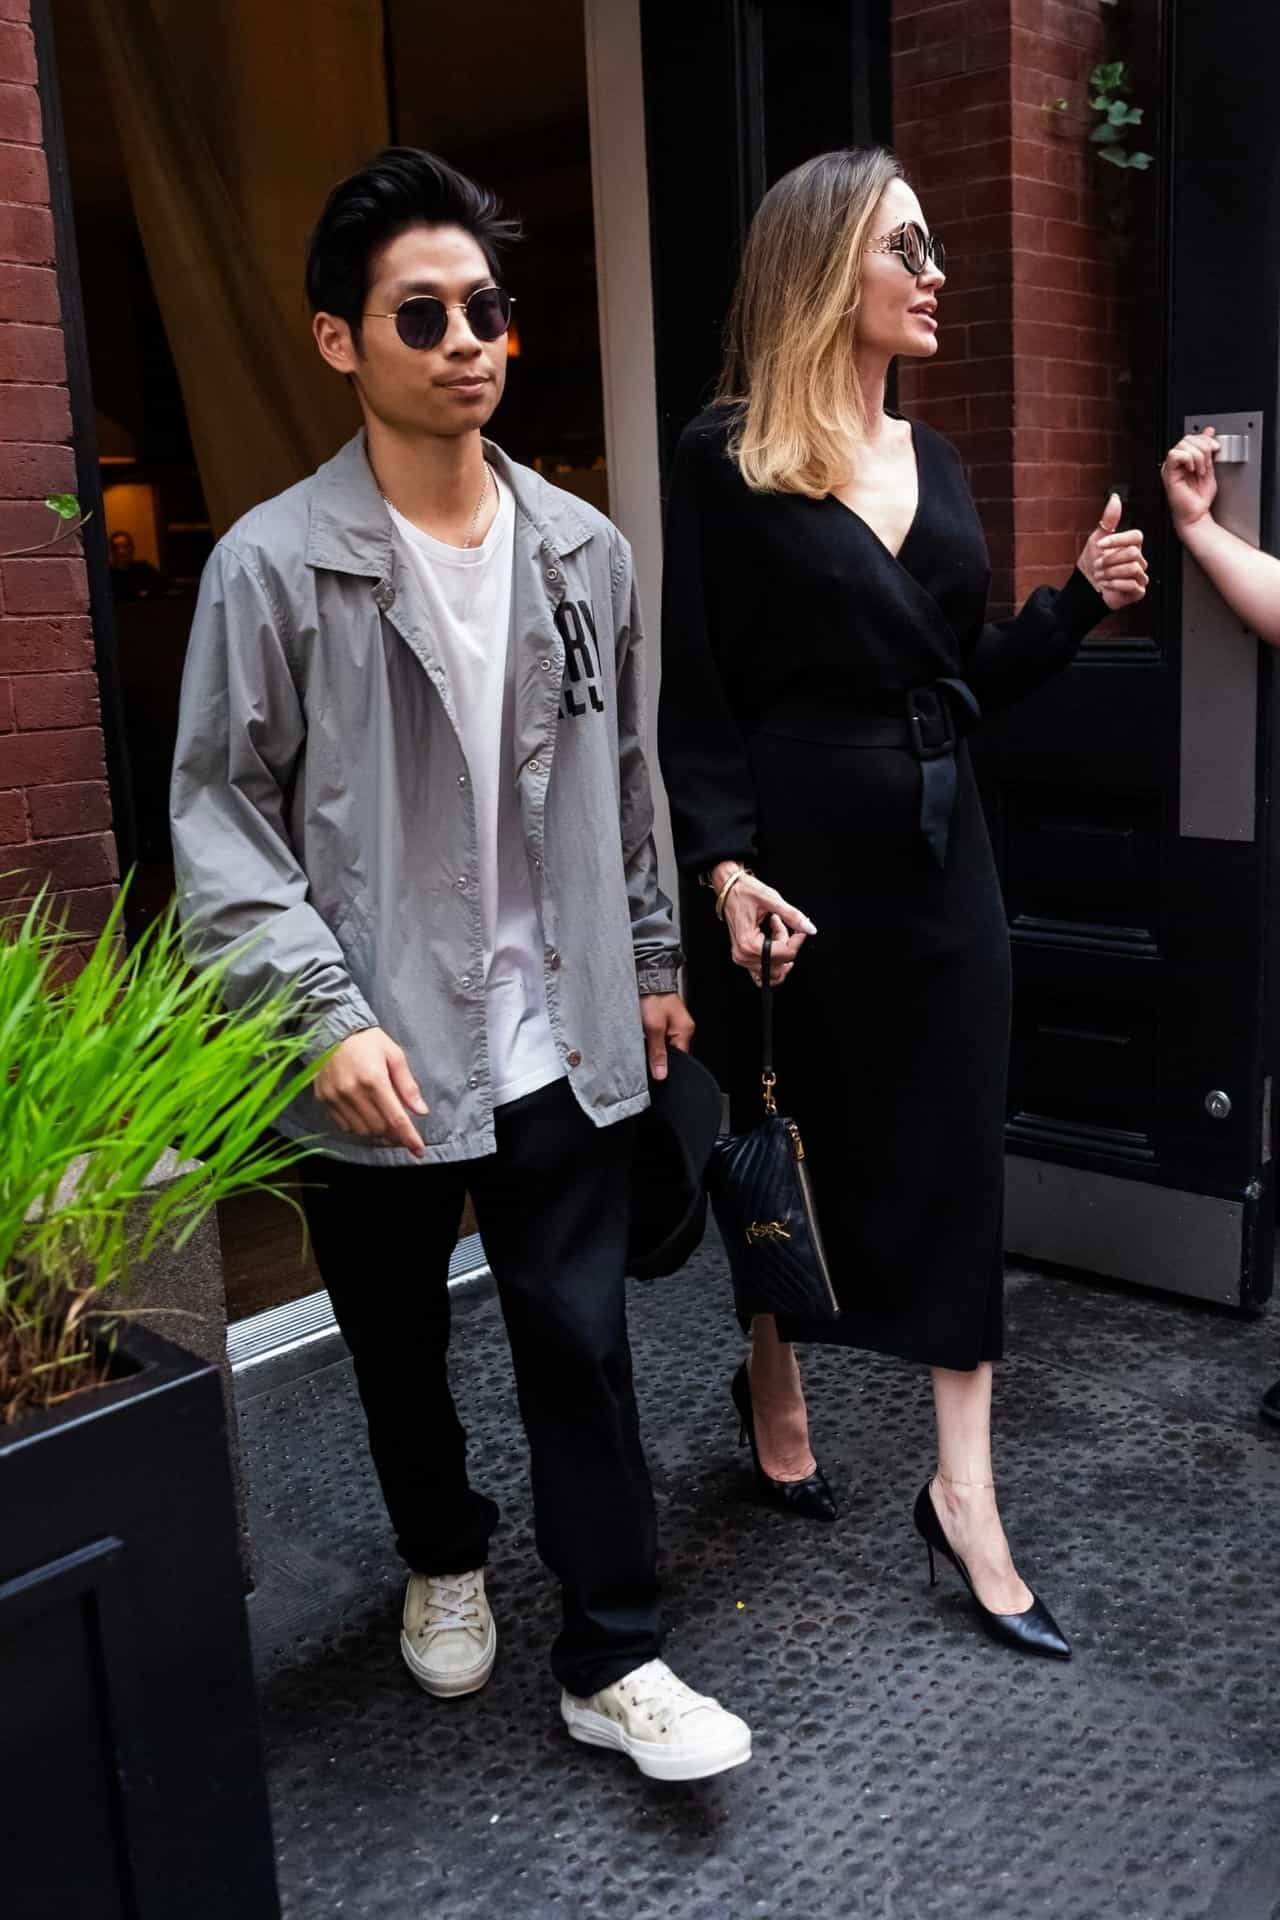 Angelina Jolie Radiates Elegance as She Steps Out with Son Pax in NYC